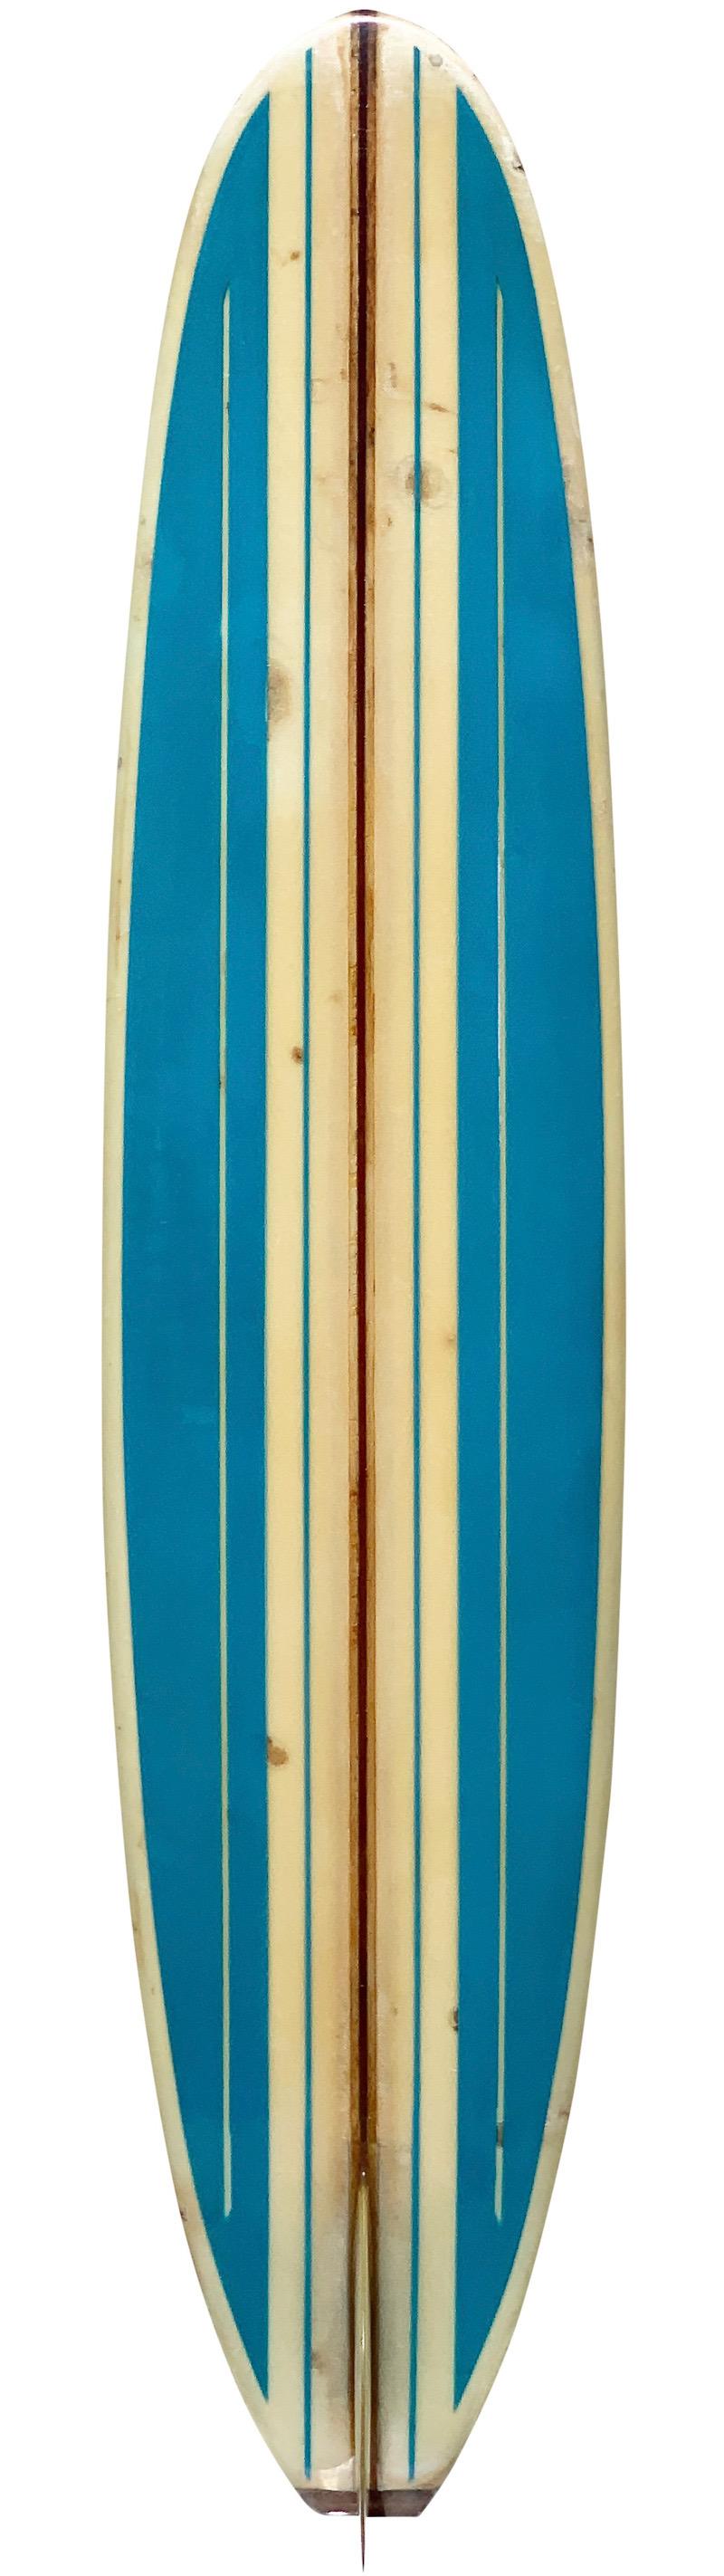 Mid-1960s Bing classic longboard. Features beautiful blue panels with pinstriping, redwood and balsa t-band stringer, and gorgeous wooden fin. A remarkable example of an all original 1960s longboard made under the iconic Bing Surfboards label.